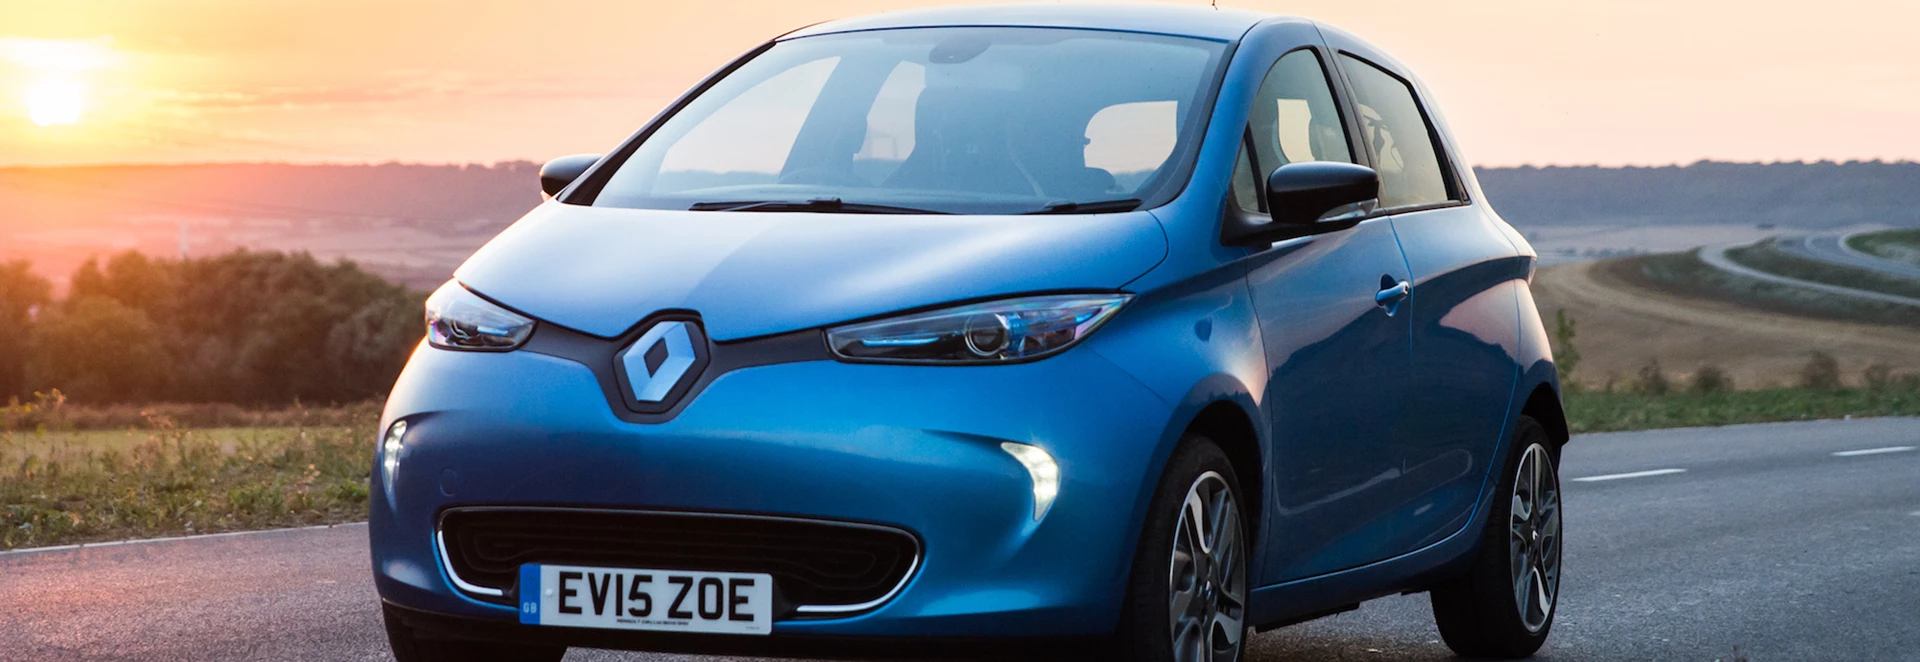 Should the 2019 Renault Zoe be your first electric car?